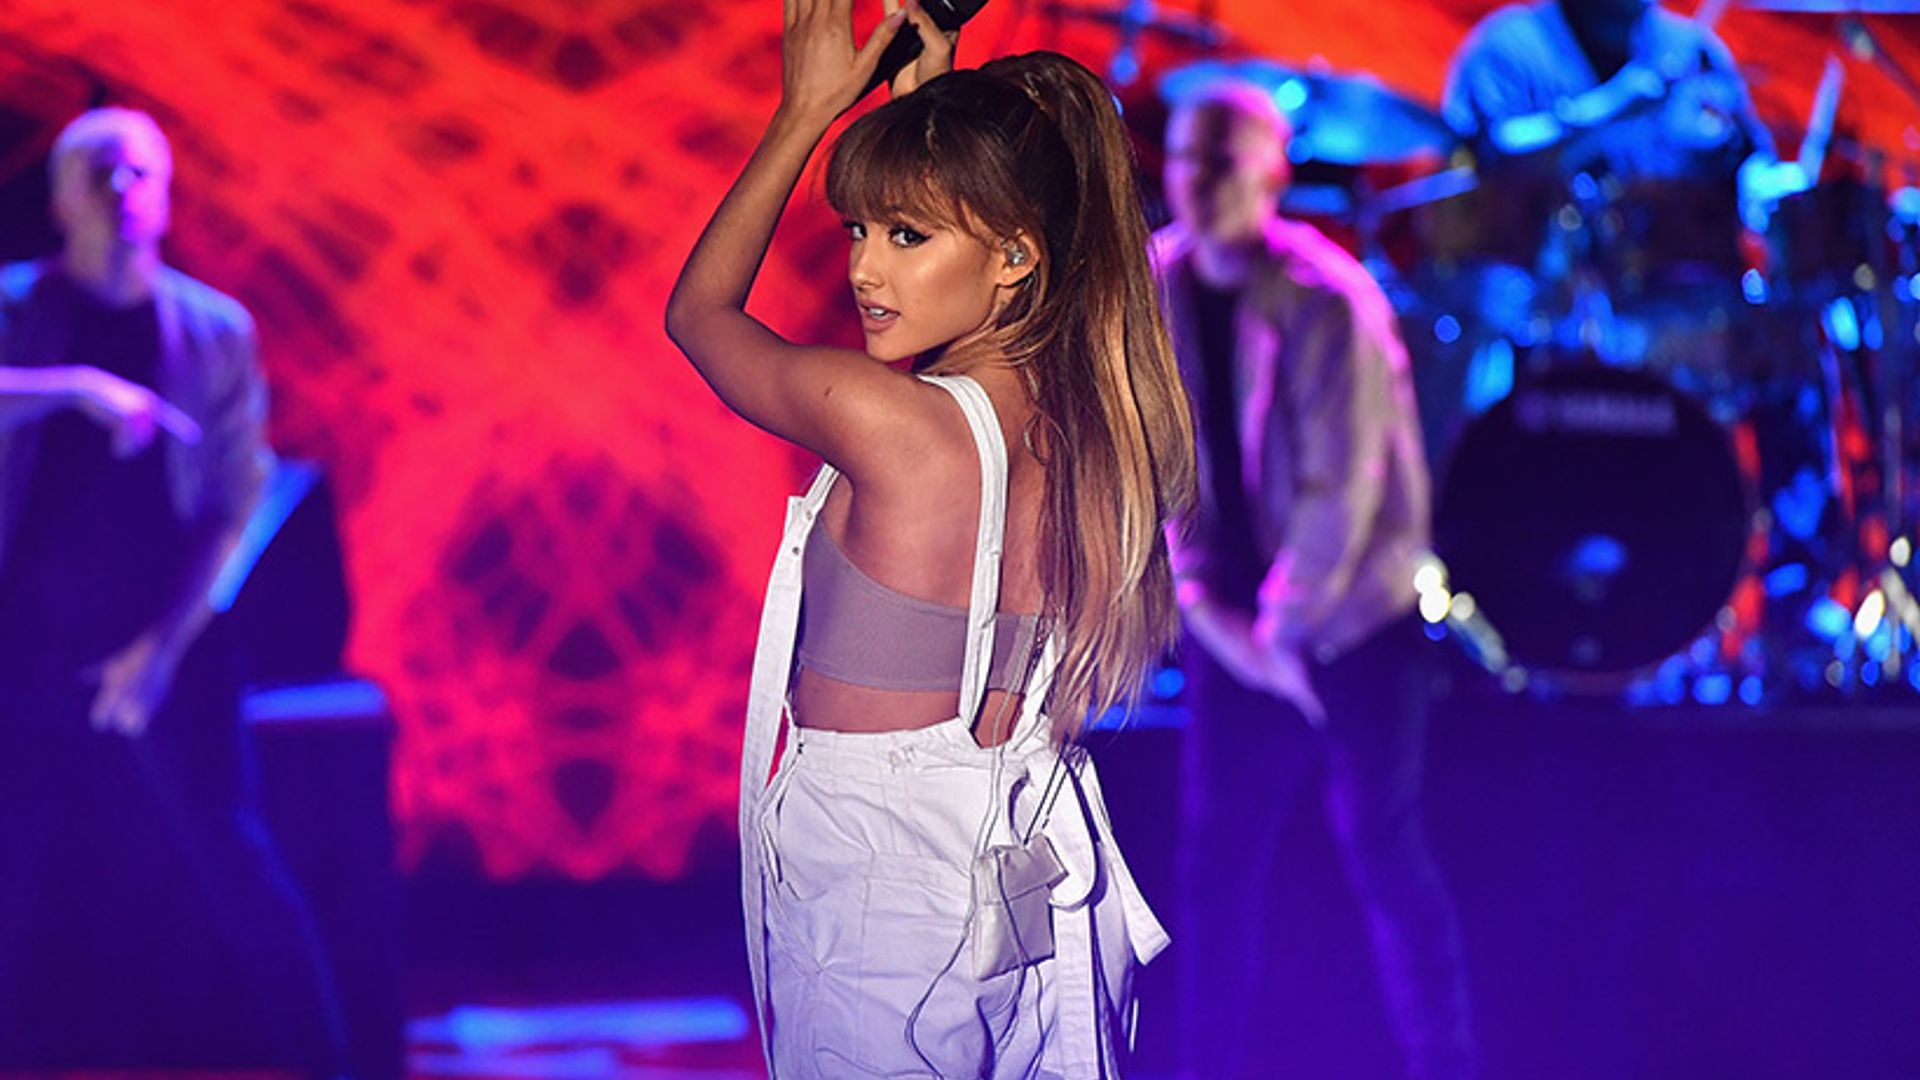 How to watch the Ariana Grande benefit concert on Sunday evening – all the details